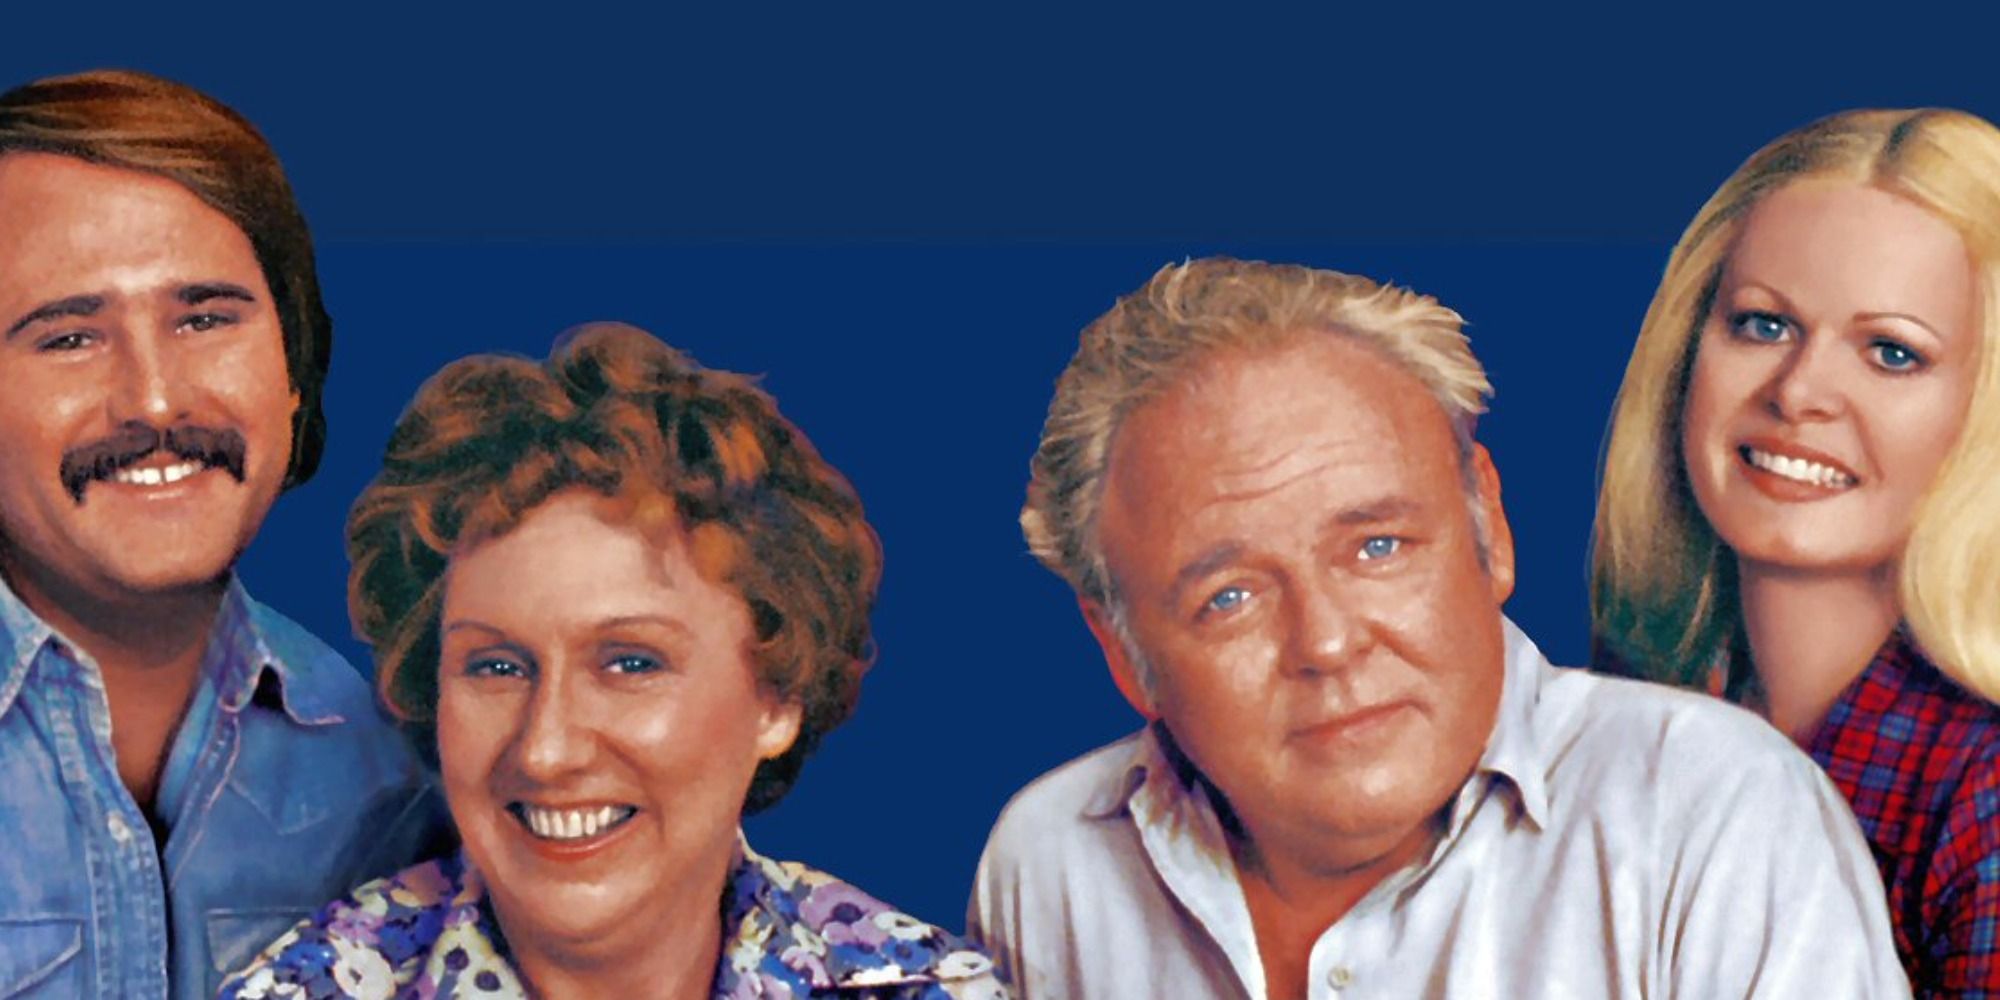 Mike Edith Archie and Gloria posed together against a blue background for All In The Family